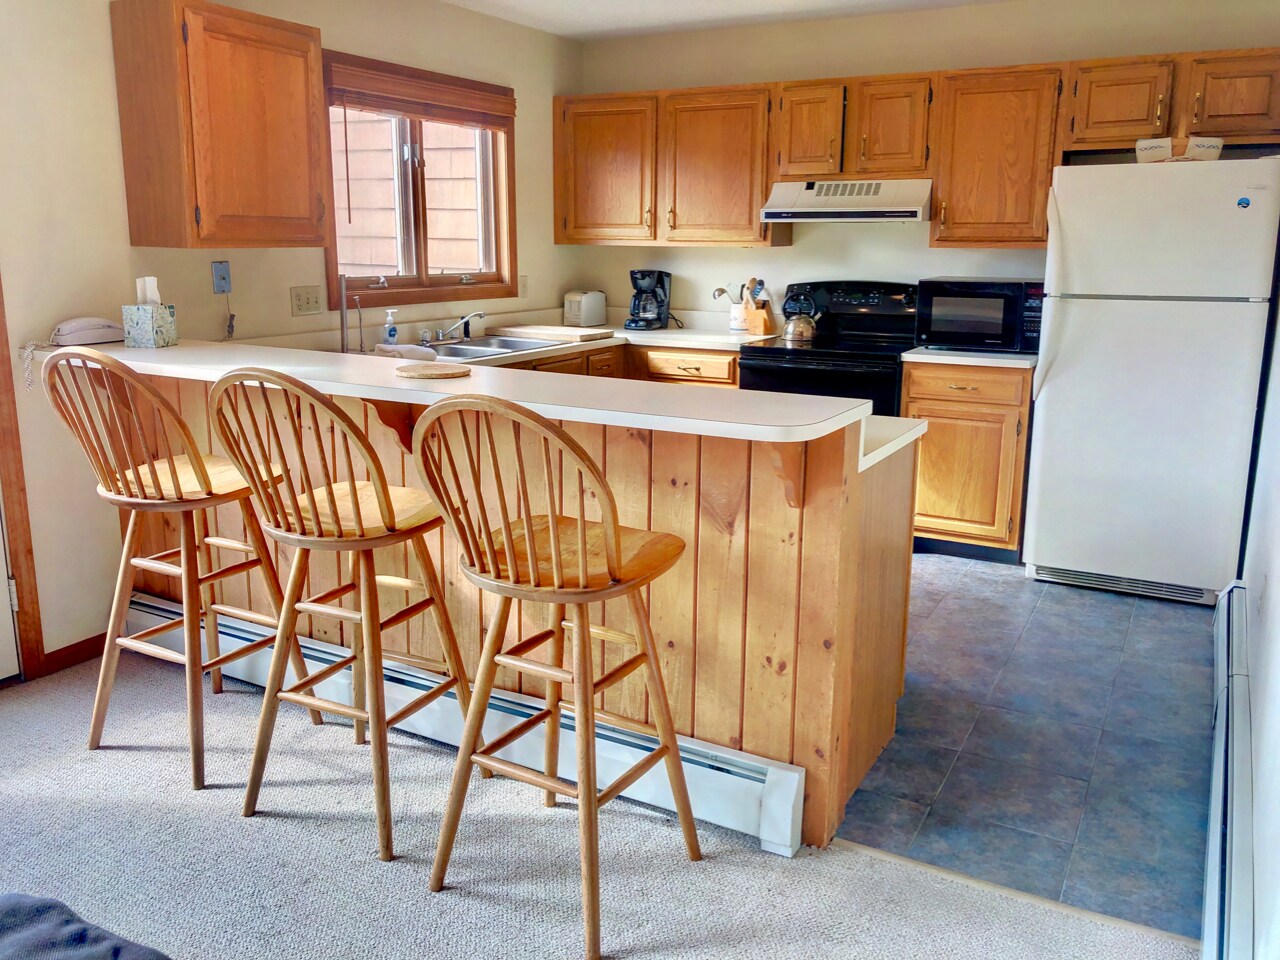 The kitchen has a fully stocked for all your cooking needs and offers a drip coffee maker and cozy breakfast bar that seats 3!